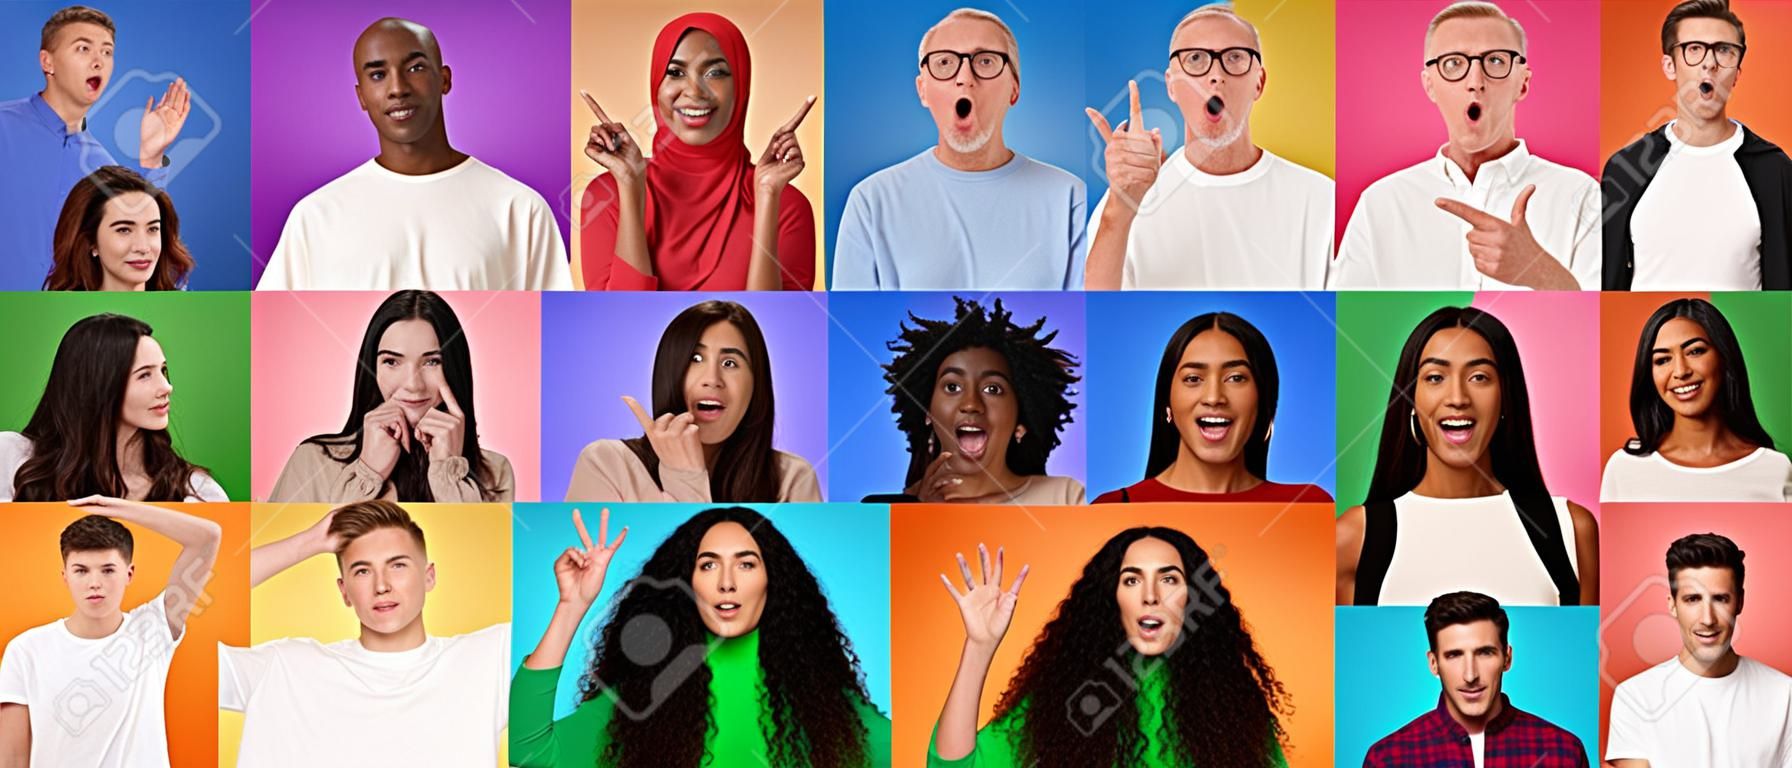 People Of Different Age And Ethnicity Expressing Diverse Emotions Over Colorful Backgrounds